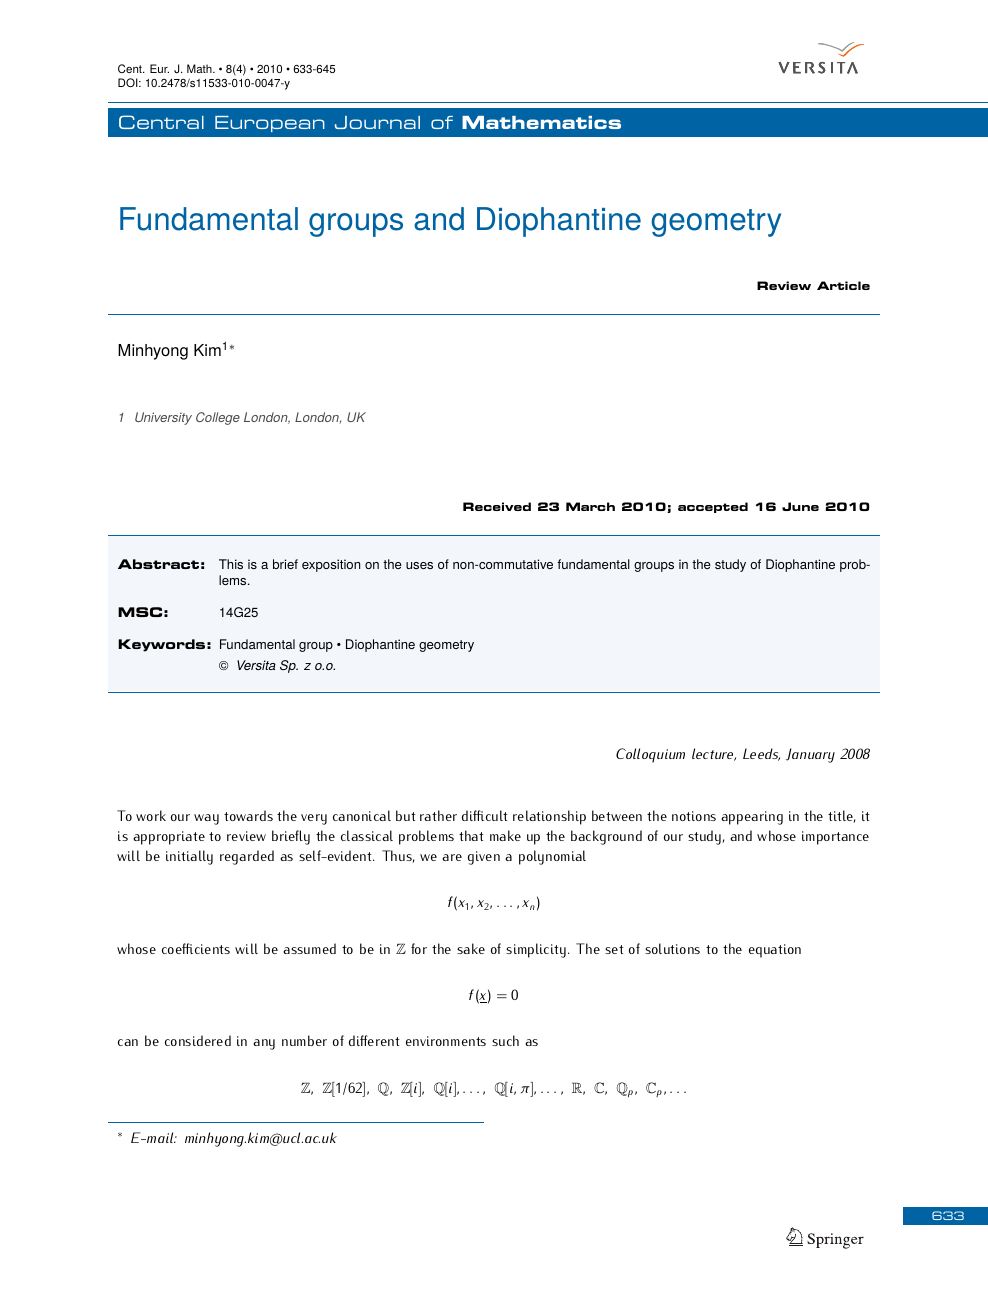 Fundamental Groups And Diophantine Geometry Topic Of Research Paper In Physical Sciences Download Scholarly Article Pdf And Read For Free On Cyberleninka Open Science Hub